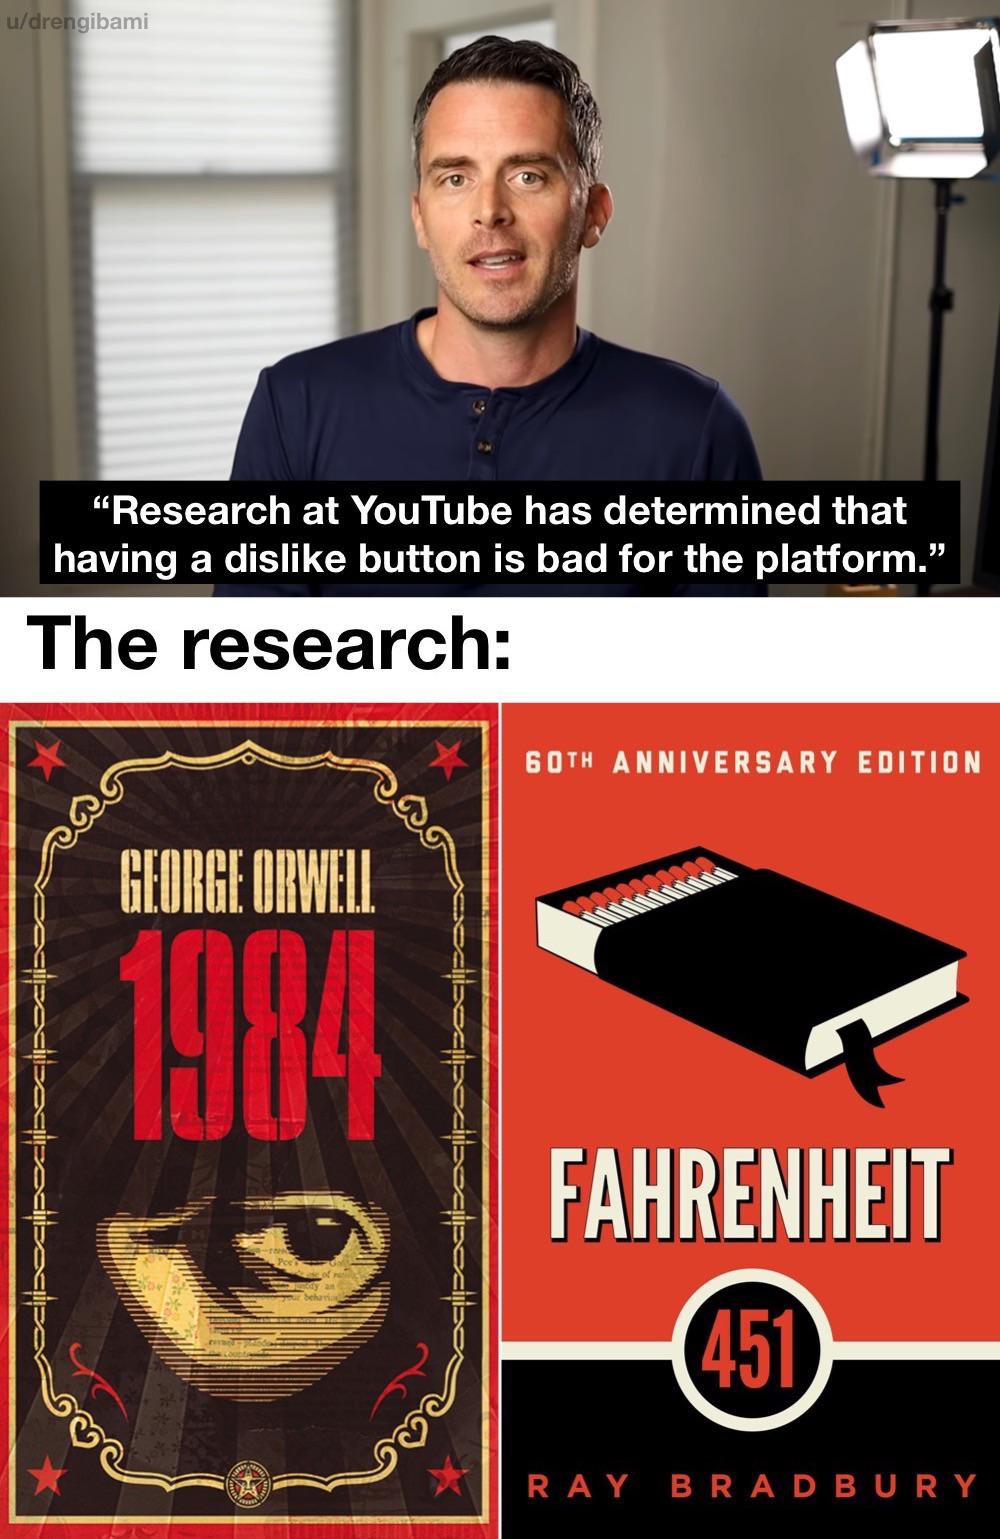 dank memes - funny memes - fahrenheit 451 book cover - udrengibami "Research at YouTube has determined that having a dis button is bad for the platform. The research 60TH Anniversary Edition George Orwell Sasa 1984 lisesi Fahrenheit 451 Ray Bradbury